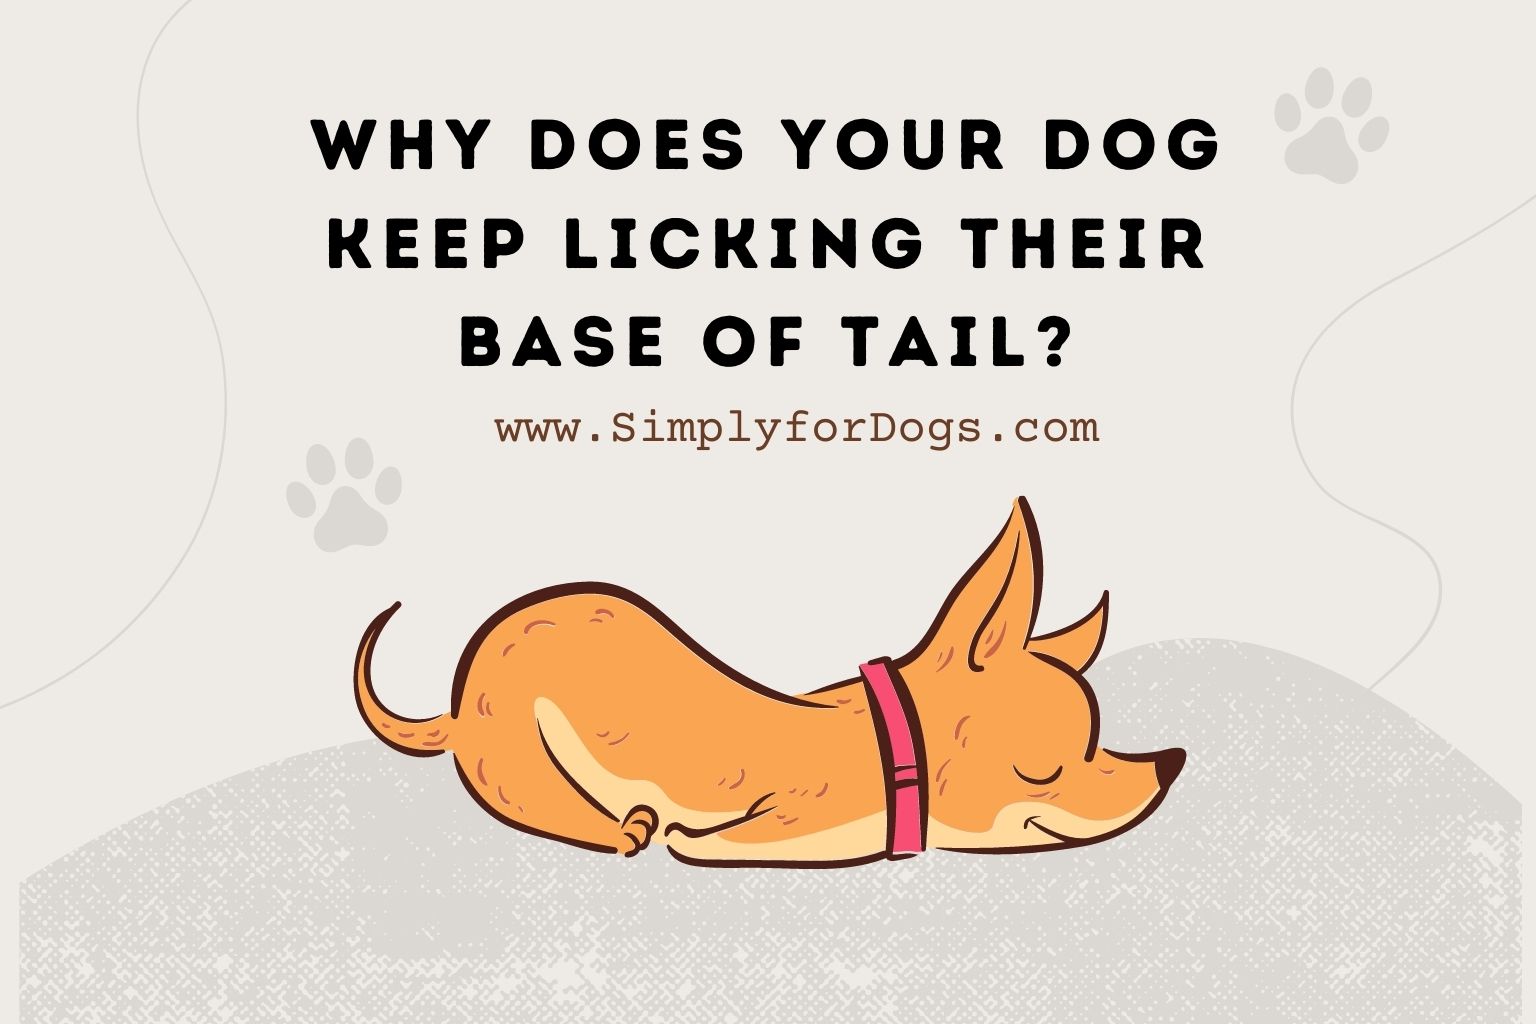 Why Does Your Dog Keep Licking Their Base of Tail_